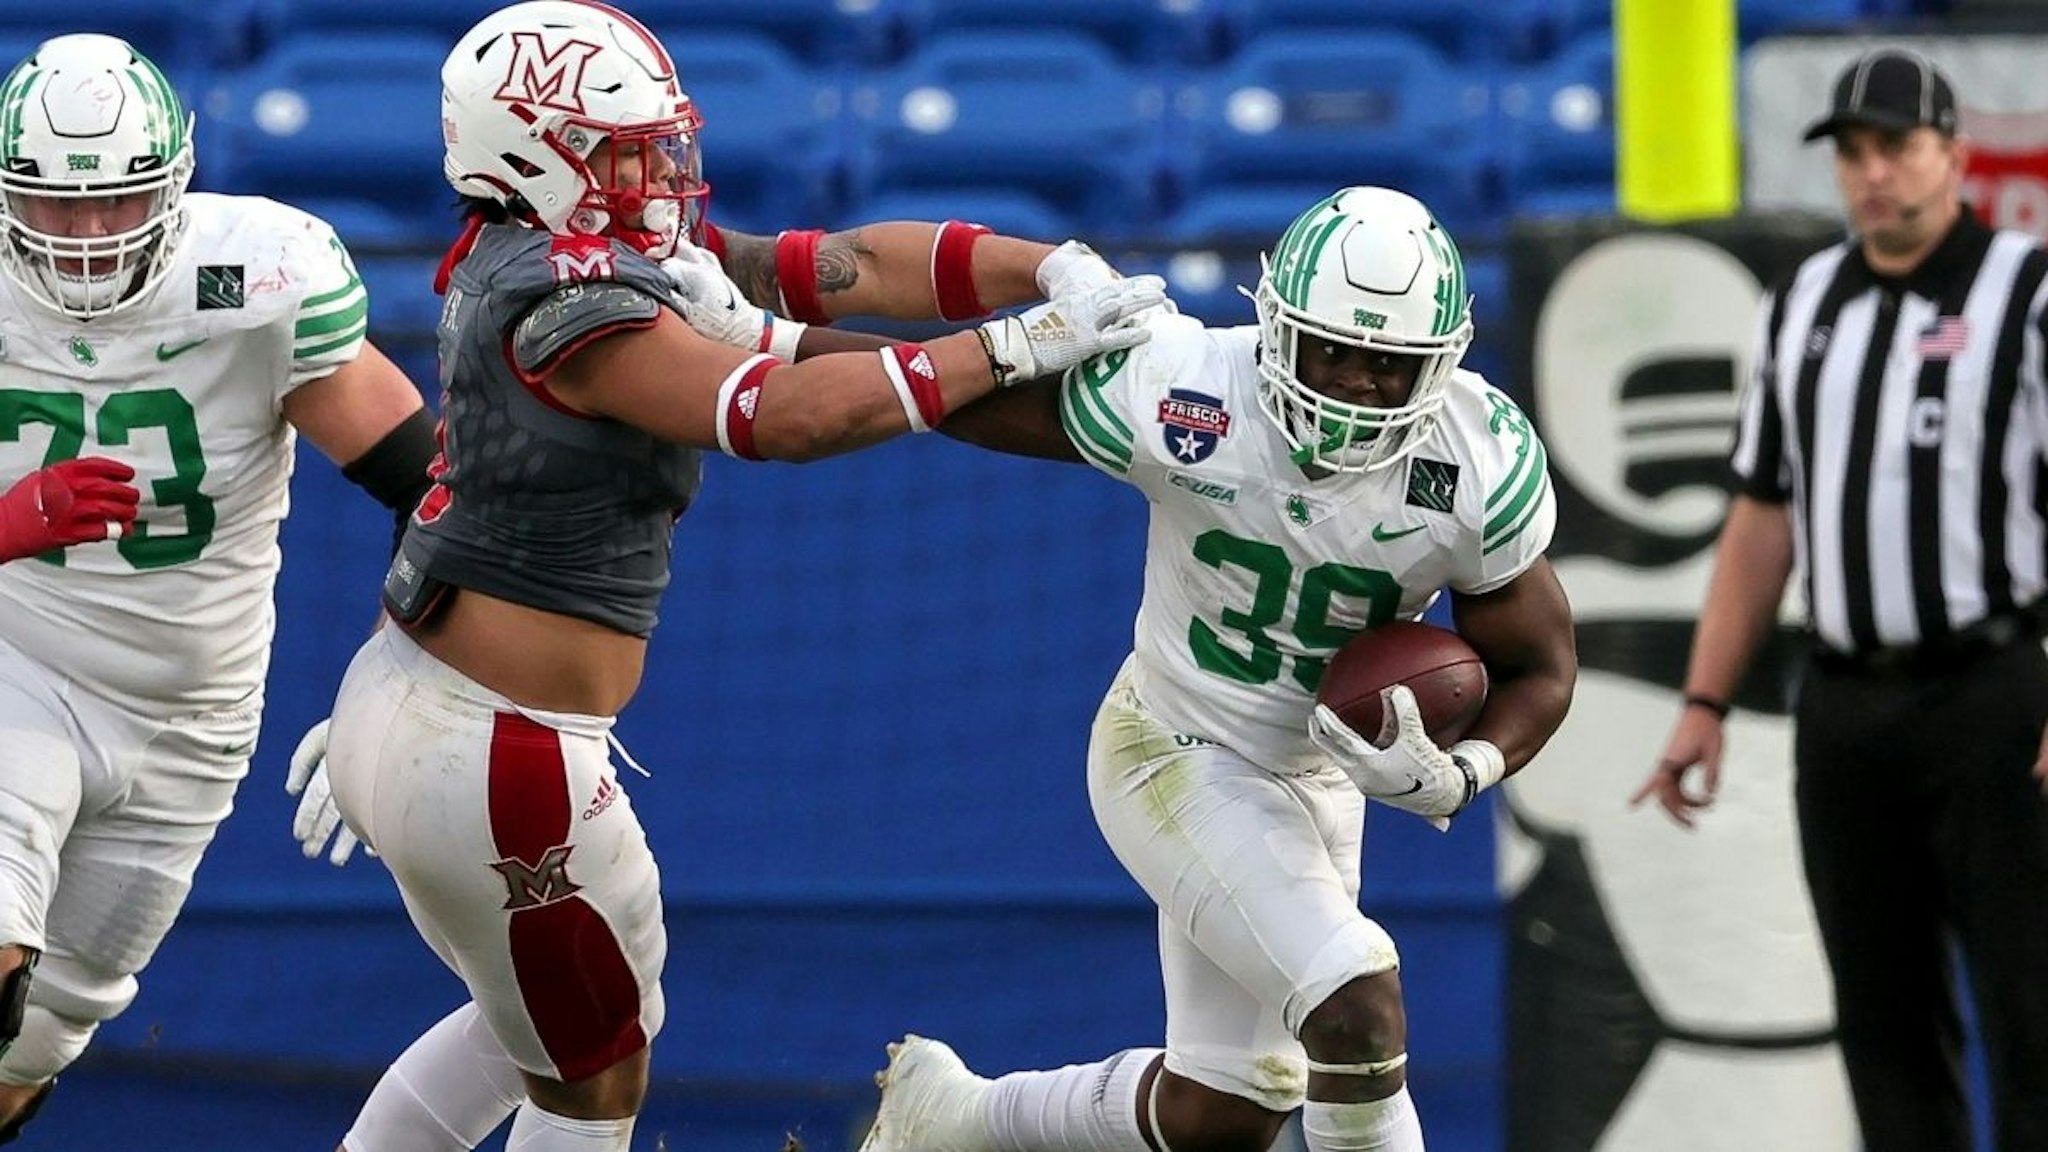 North Texas Mean Green running back Ayo Adeyi (39) gives a stiff arm to Miami (OH) Redhawks linebacker Ivan Pace Jr (L) during the Frisco Football Classic game between Miami (OH) Redhawks and North Texas Mean Green on December 23, 2021 at the Toyota Stadium in Frisco,Texas.